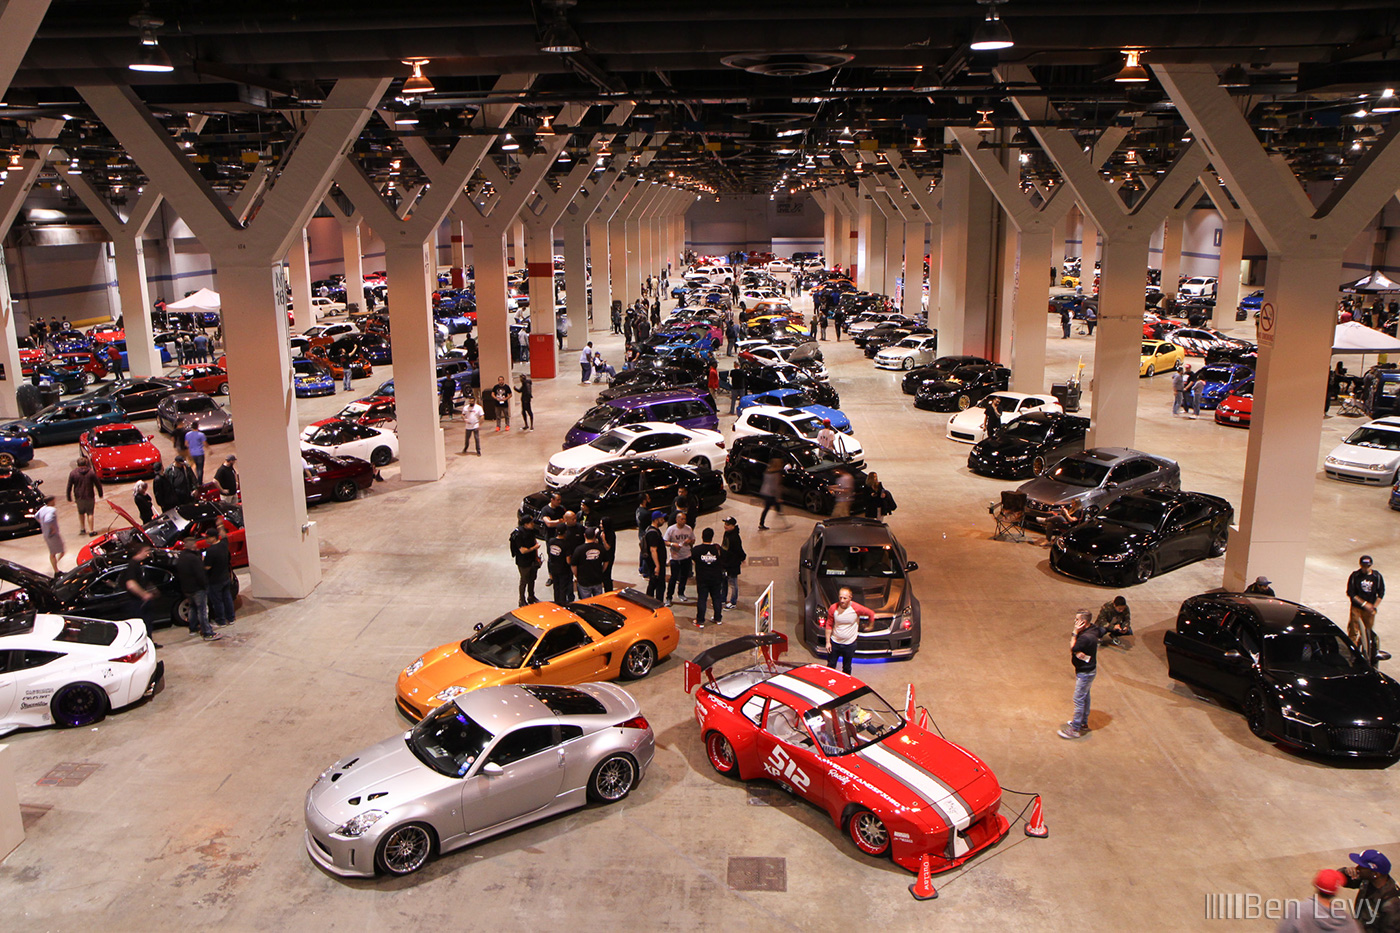 The Show Floor for Wekfest Chicago 2017